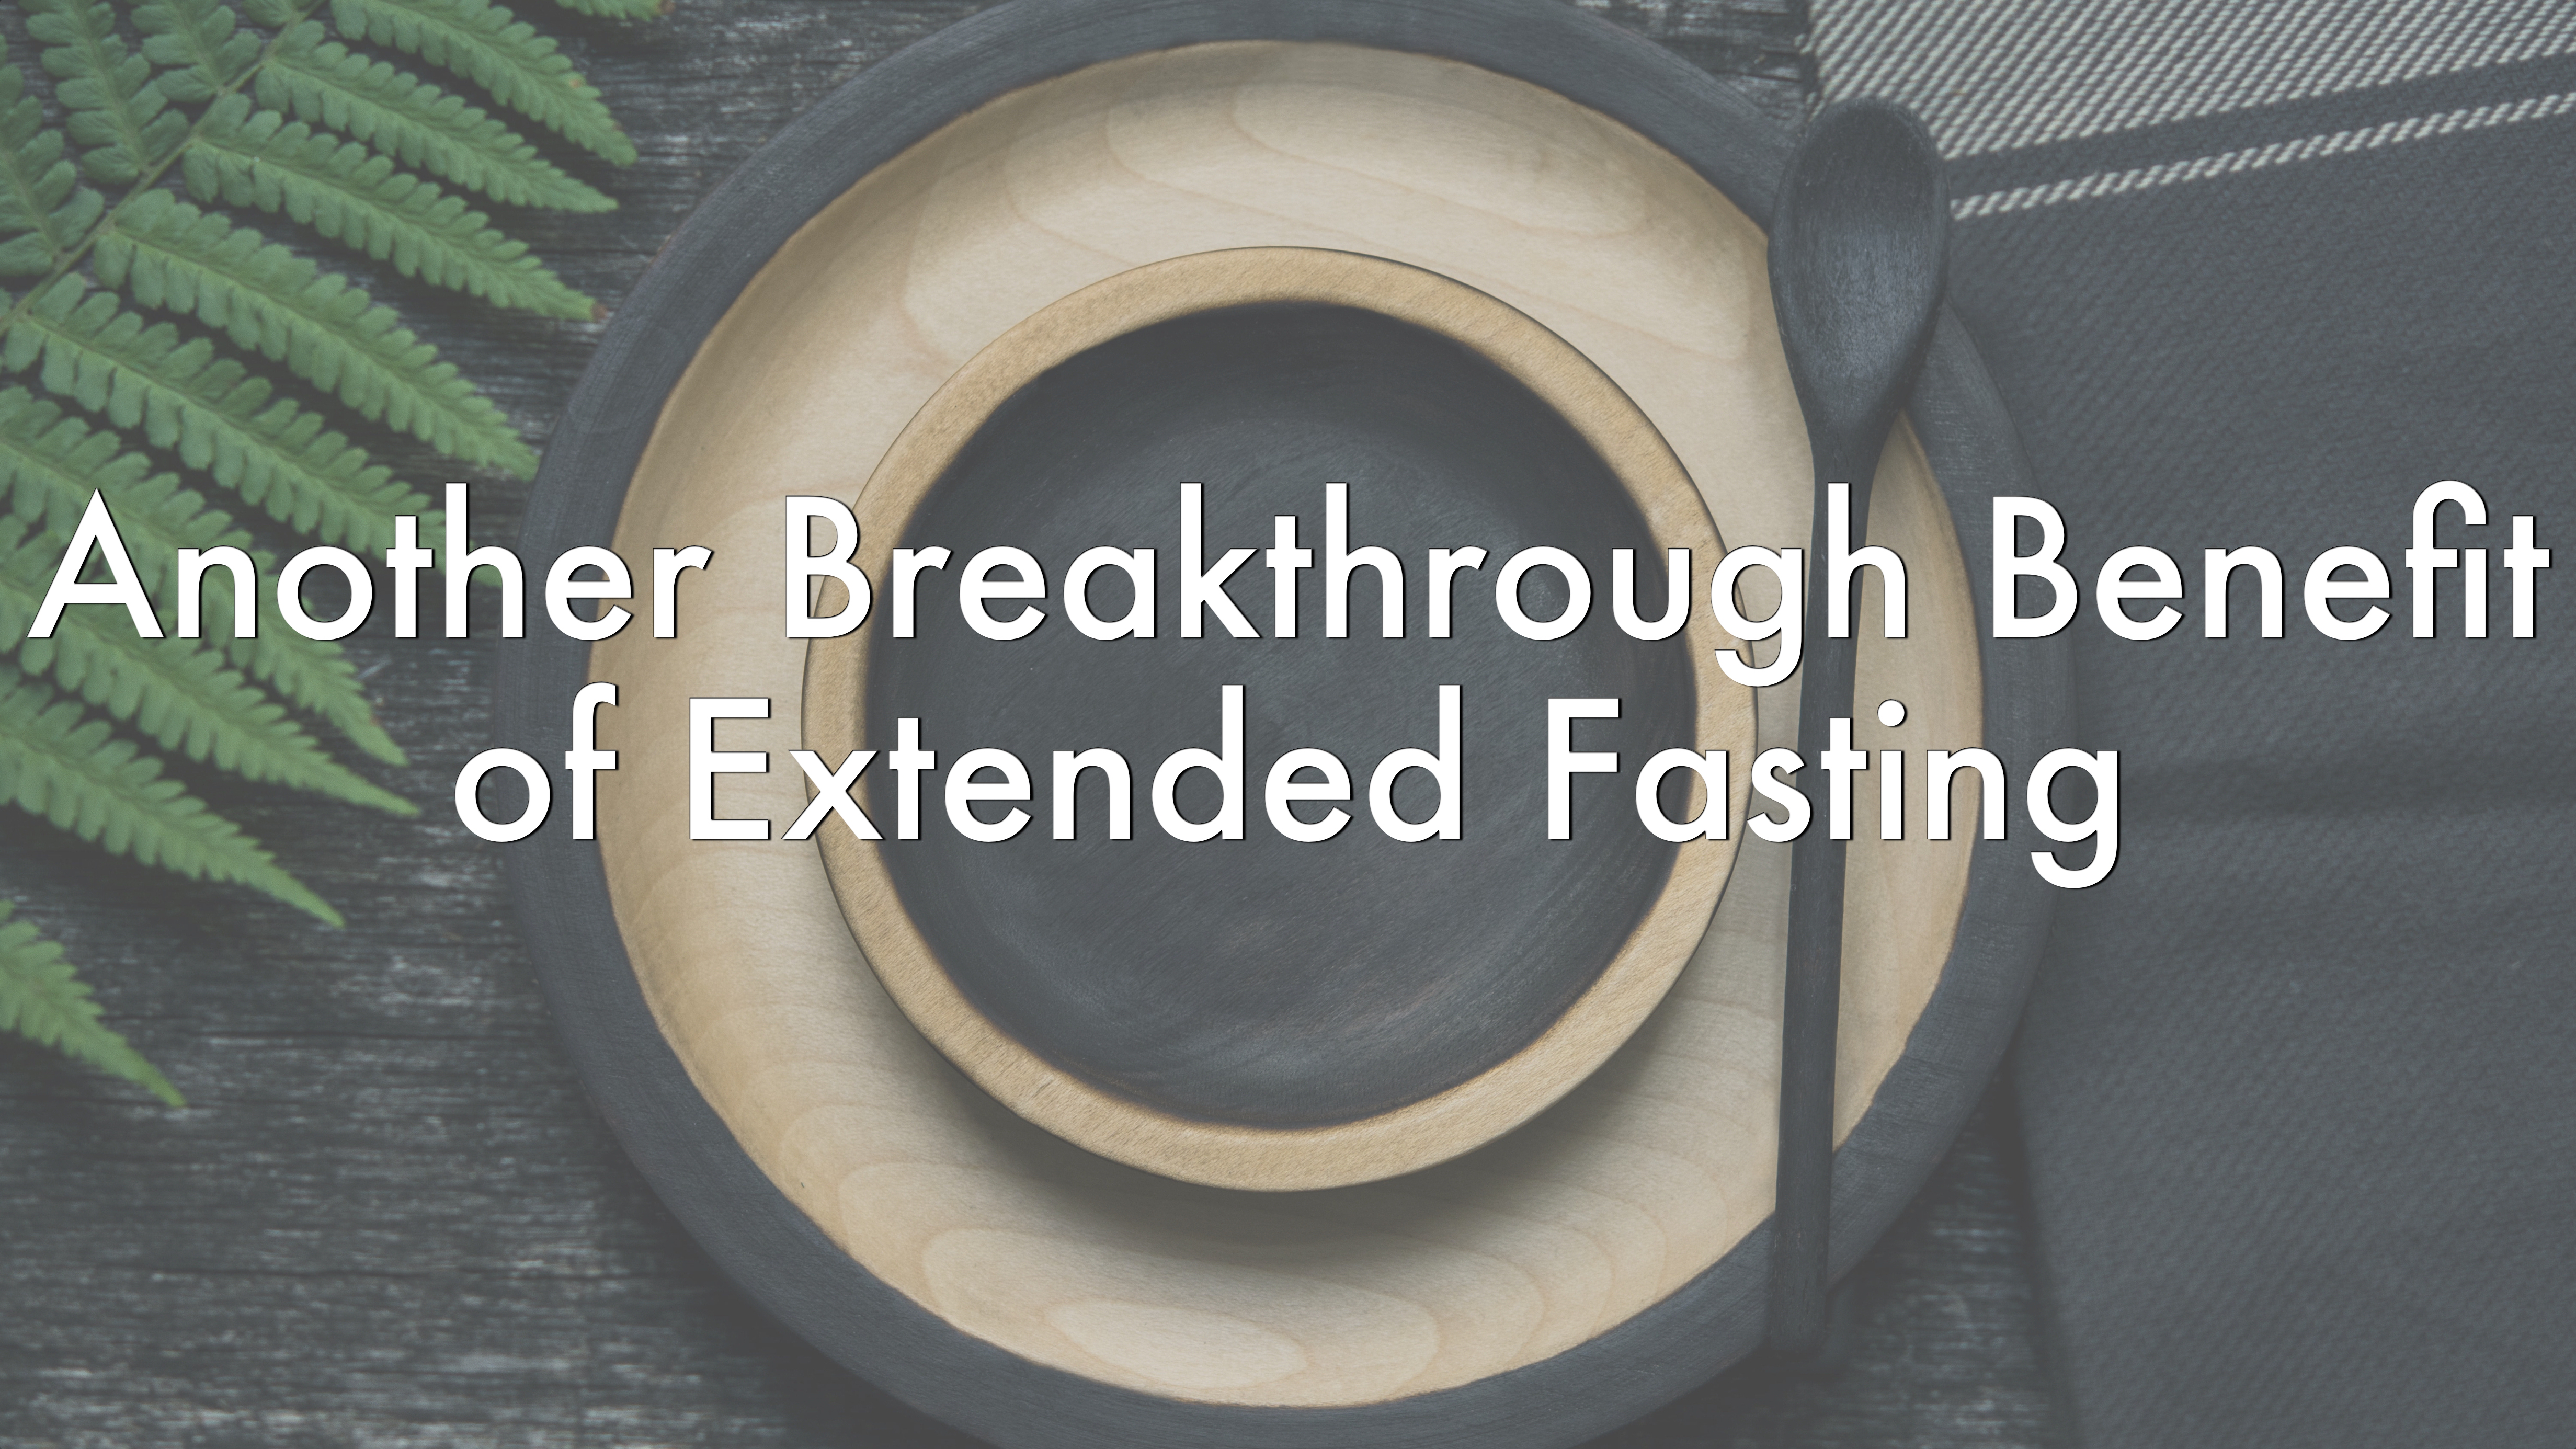 Another Breakthrough Benefit of Extended Fasting